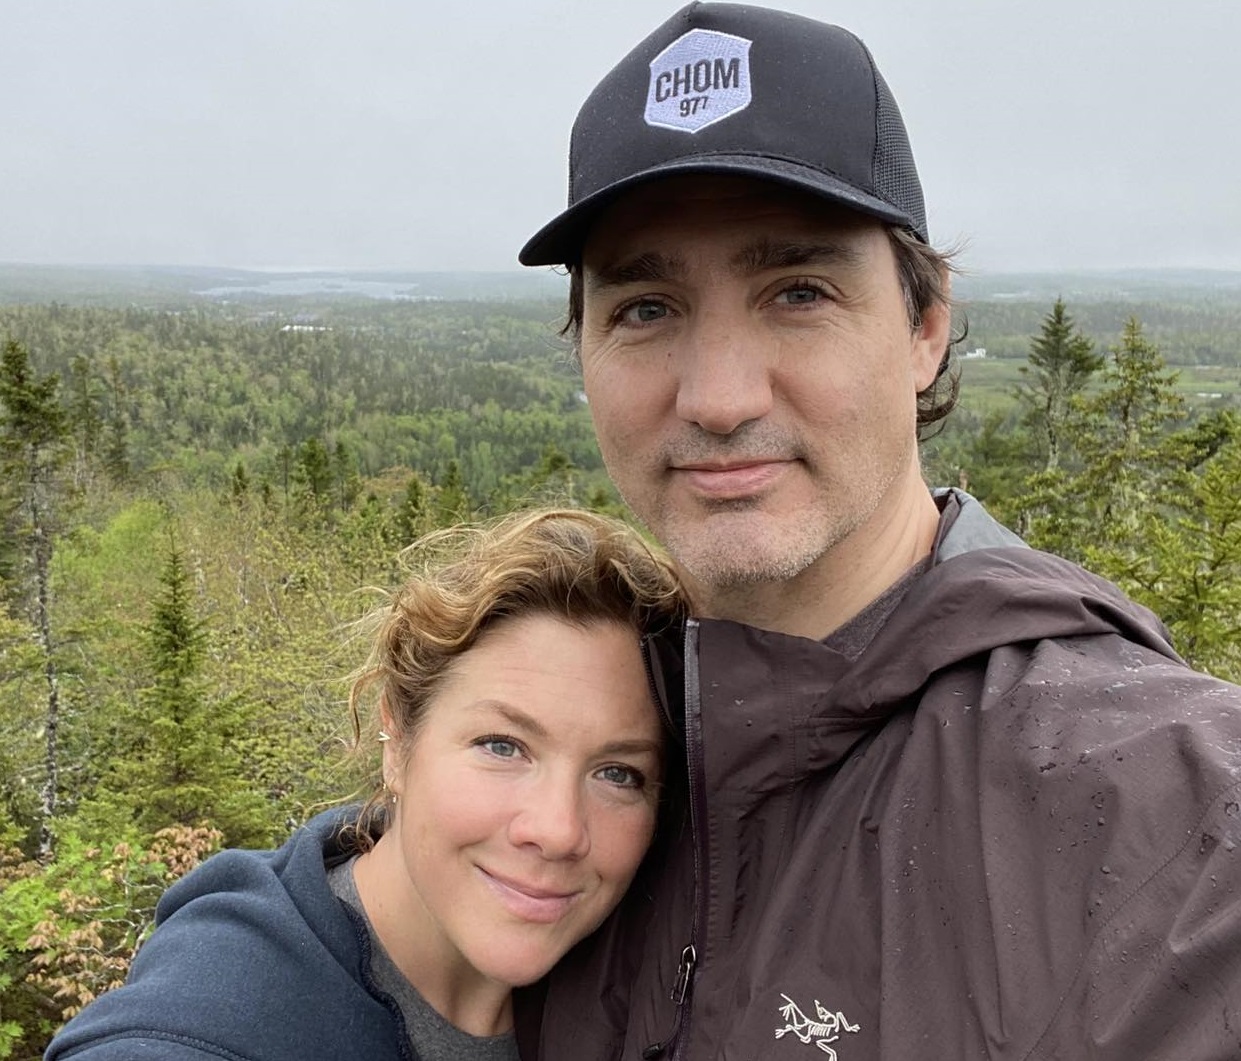 Prime Minister Justin Trudeau heads to B.C. for vacation with family